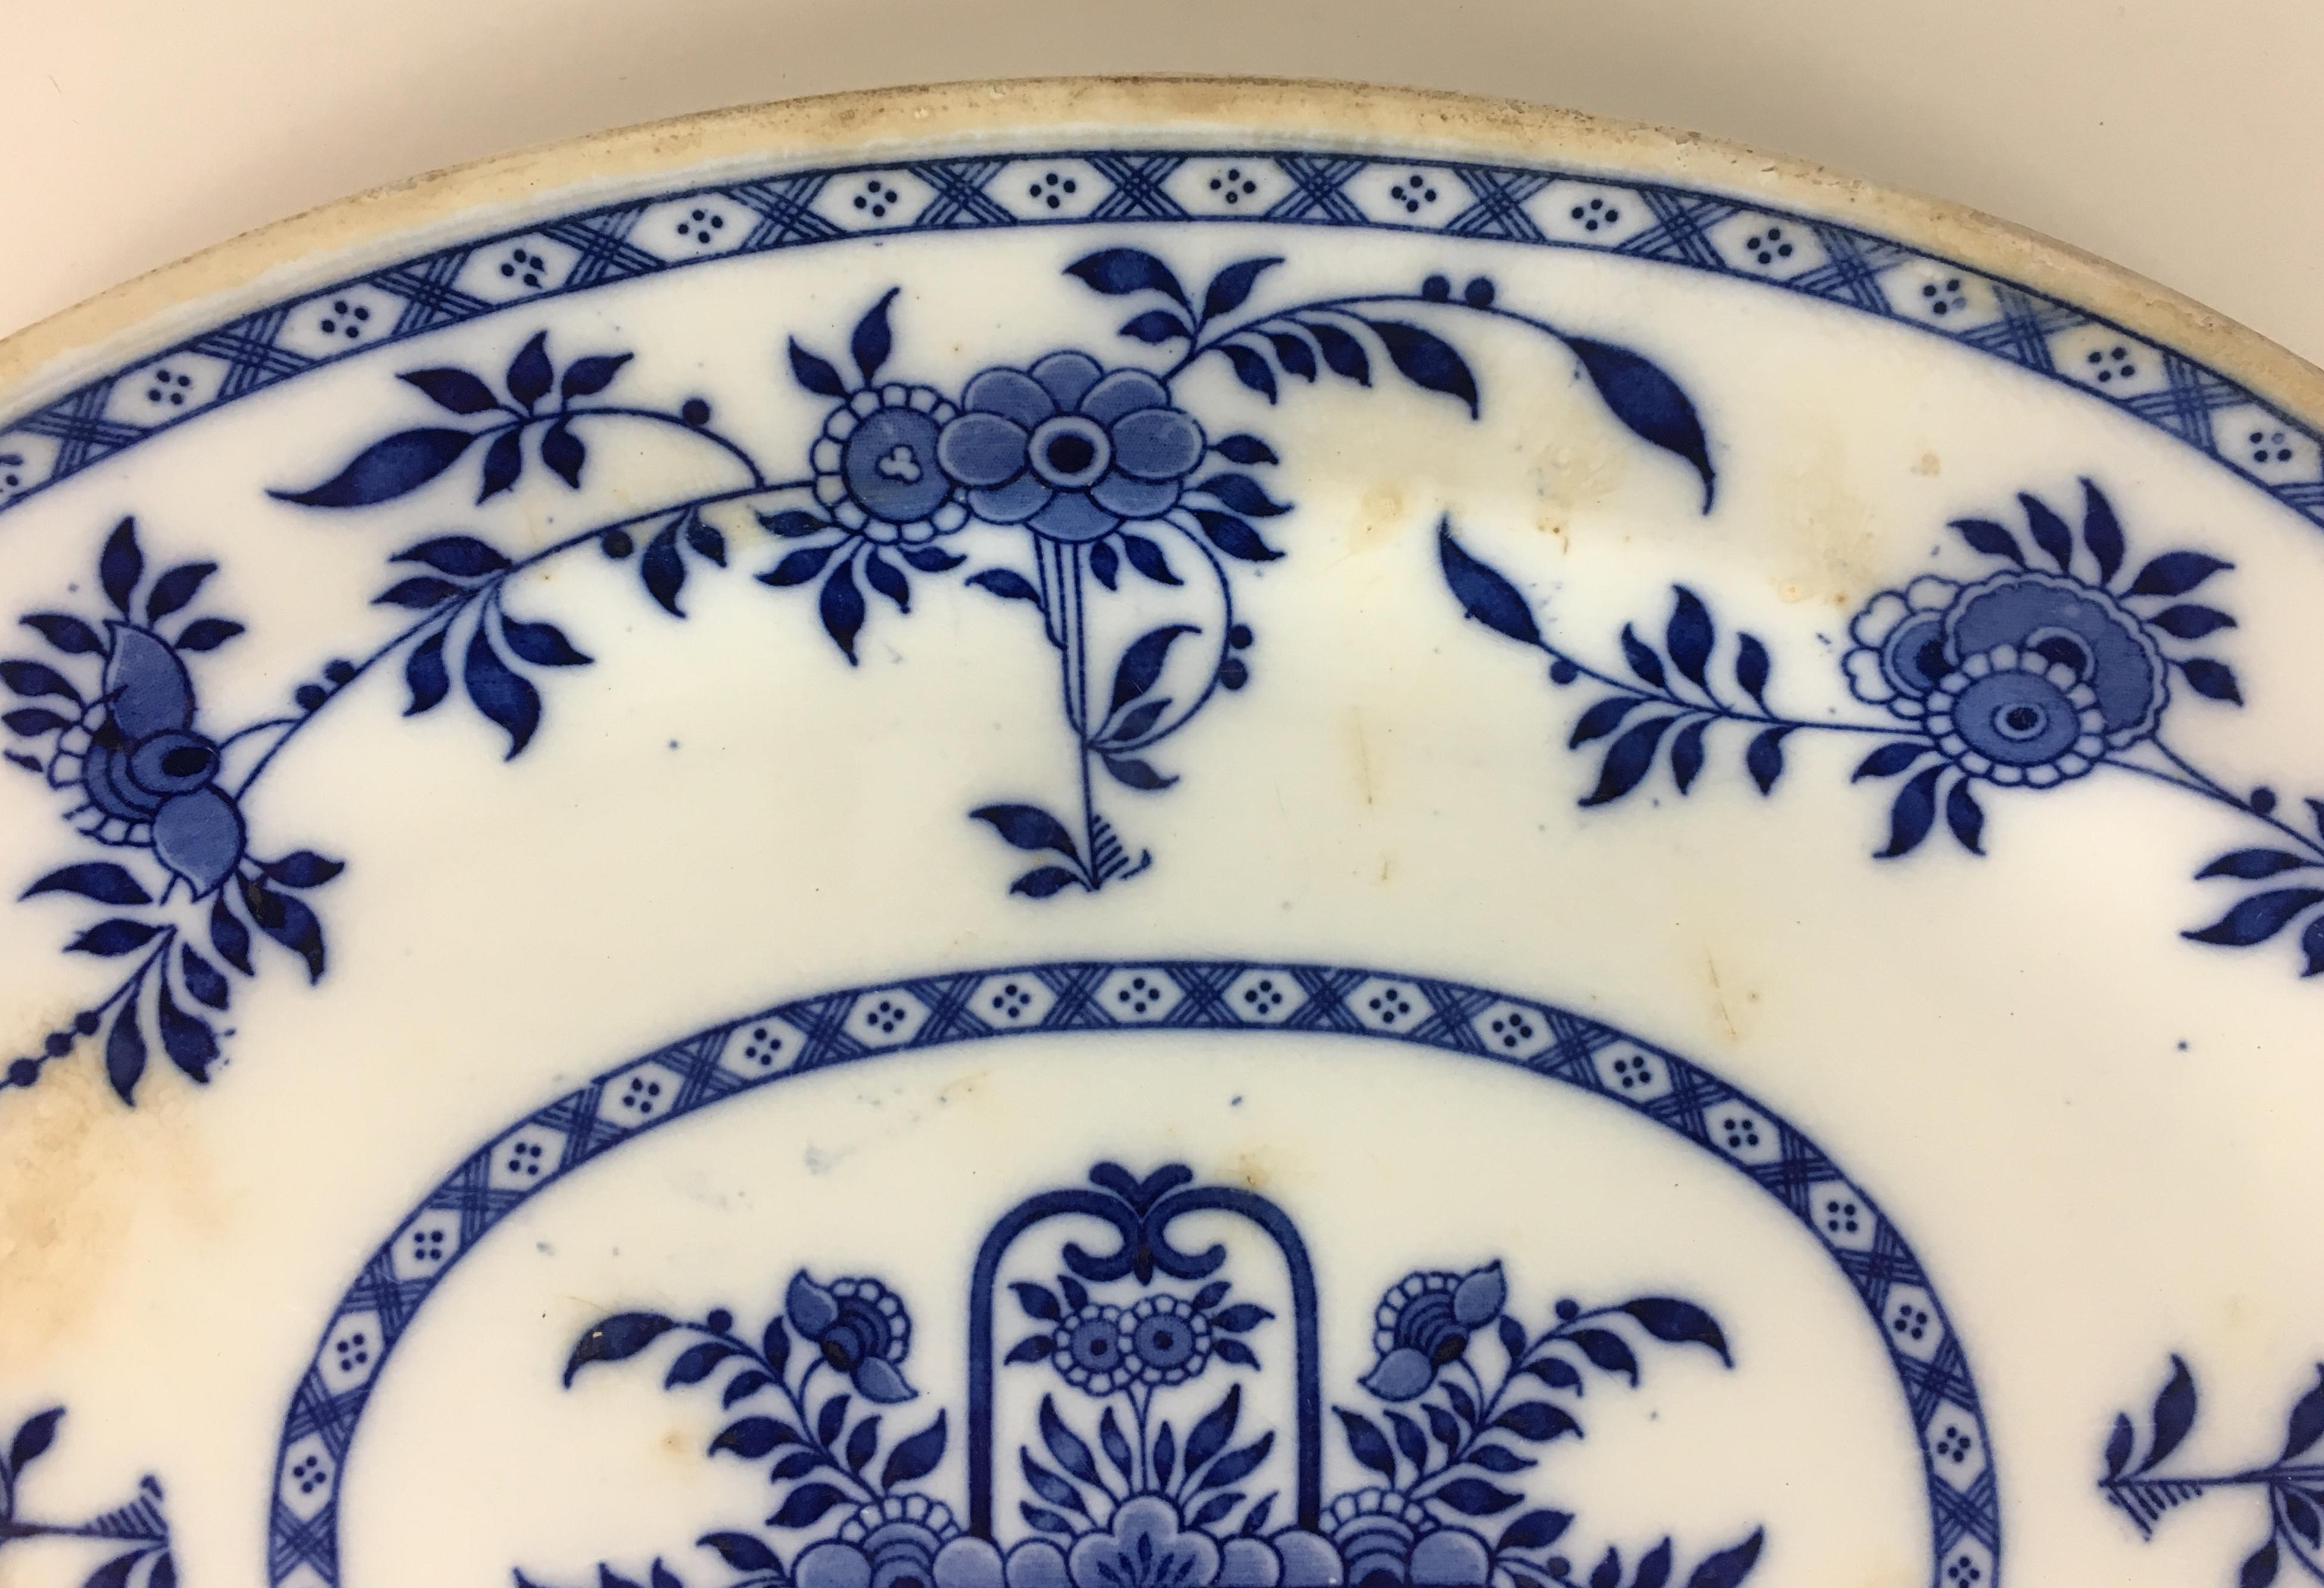 Delft earthenware dish with classical blue and white camaïeu floral design with large floral basket in the centre, circa 1920s. 
Maker's with other impressed marks on the bottom. 

On the edge, fine lace and blue threads. 
Period: Late 19th-early